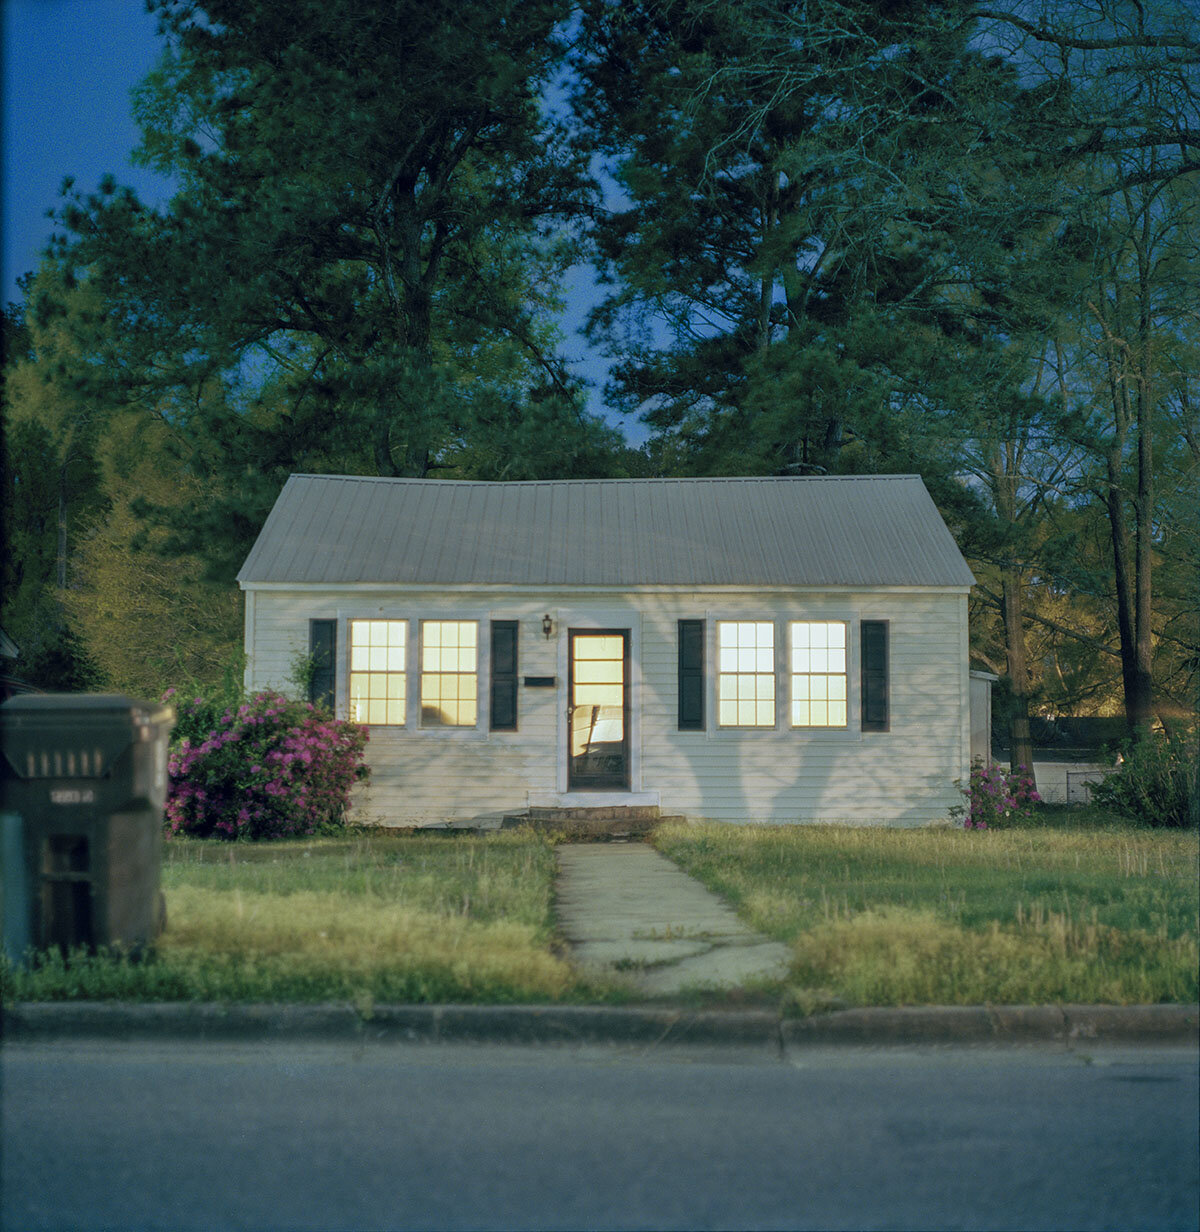  Dana Smessaert   Leave a Lantern On , 2020  From the series: An Obligation to do One’s Best  Color Negative Print  